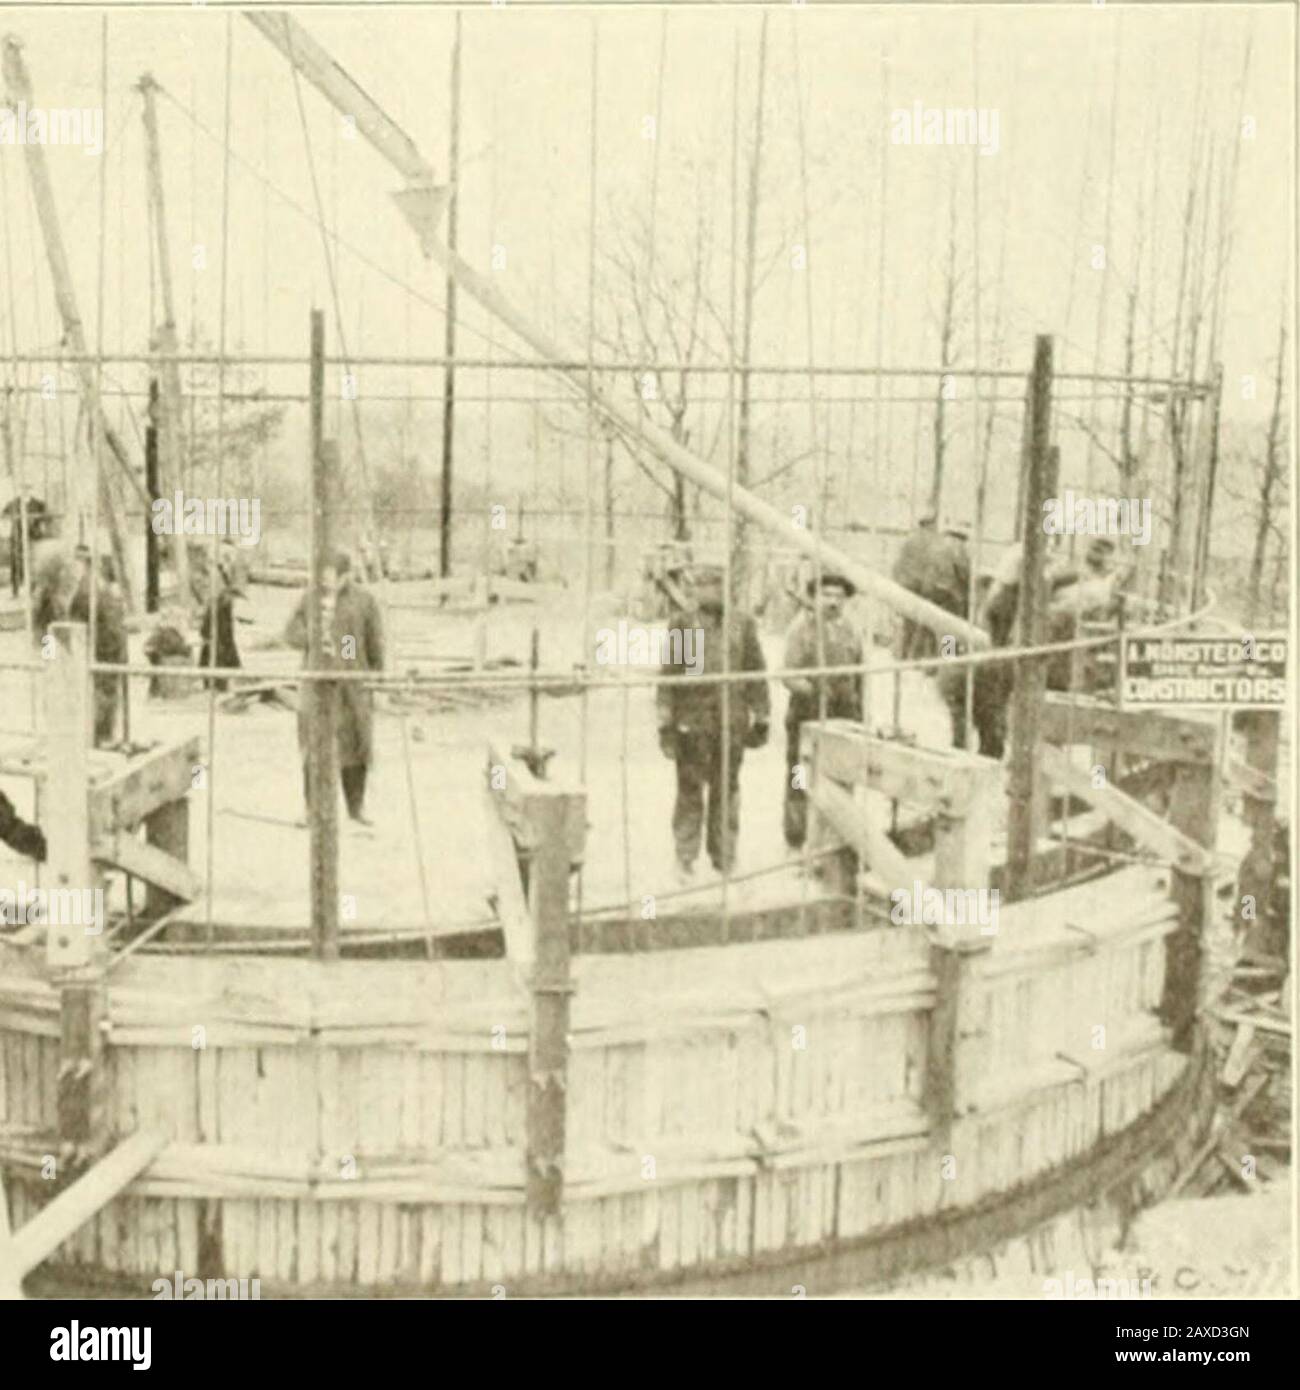 Engineering and Contracting . ? fry^-. Fig. 4. View of Completed Forms Shortly After They Had Begun to Move.The Jacking Forms Are Also Shown. move. The jacks which accomplishe.l the ver- lowering, but there were no records of wheretical movement of the forms are shown at each the new mains and the old mains were con-voke. exterior scaffold was attached to i tilnl Thf mains that were on the cross 462 Engineering and Contractino; ol. XLI. No. 16. streets were laid about ten years after themain we were working upon. It seems thatto save a httle money the consulting engineerhad ordered every othe Stock Photo